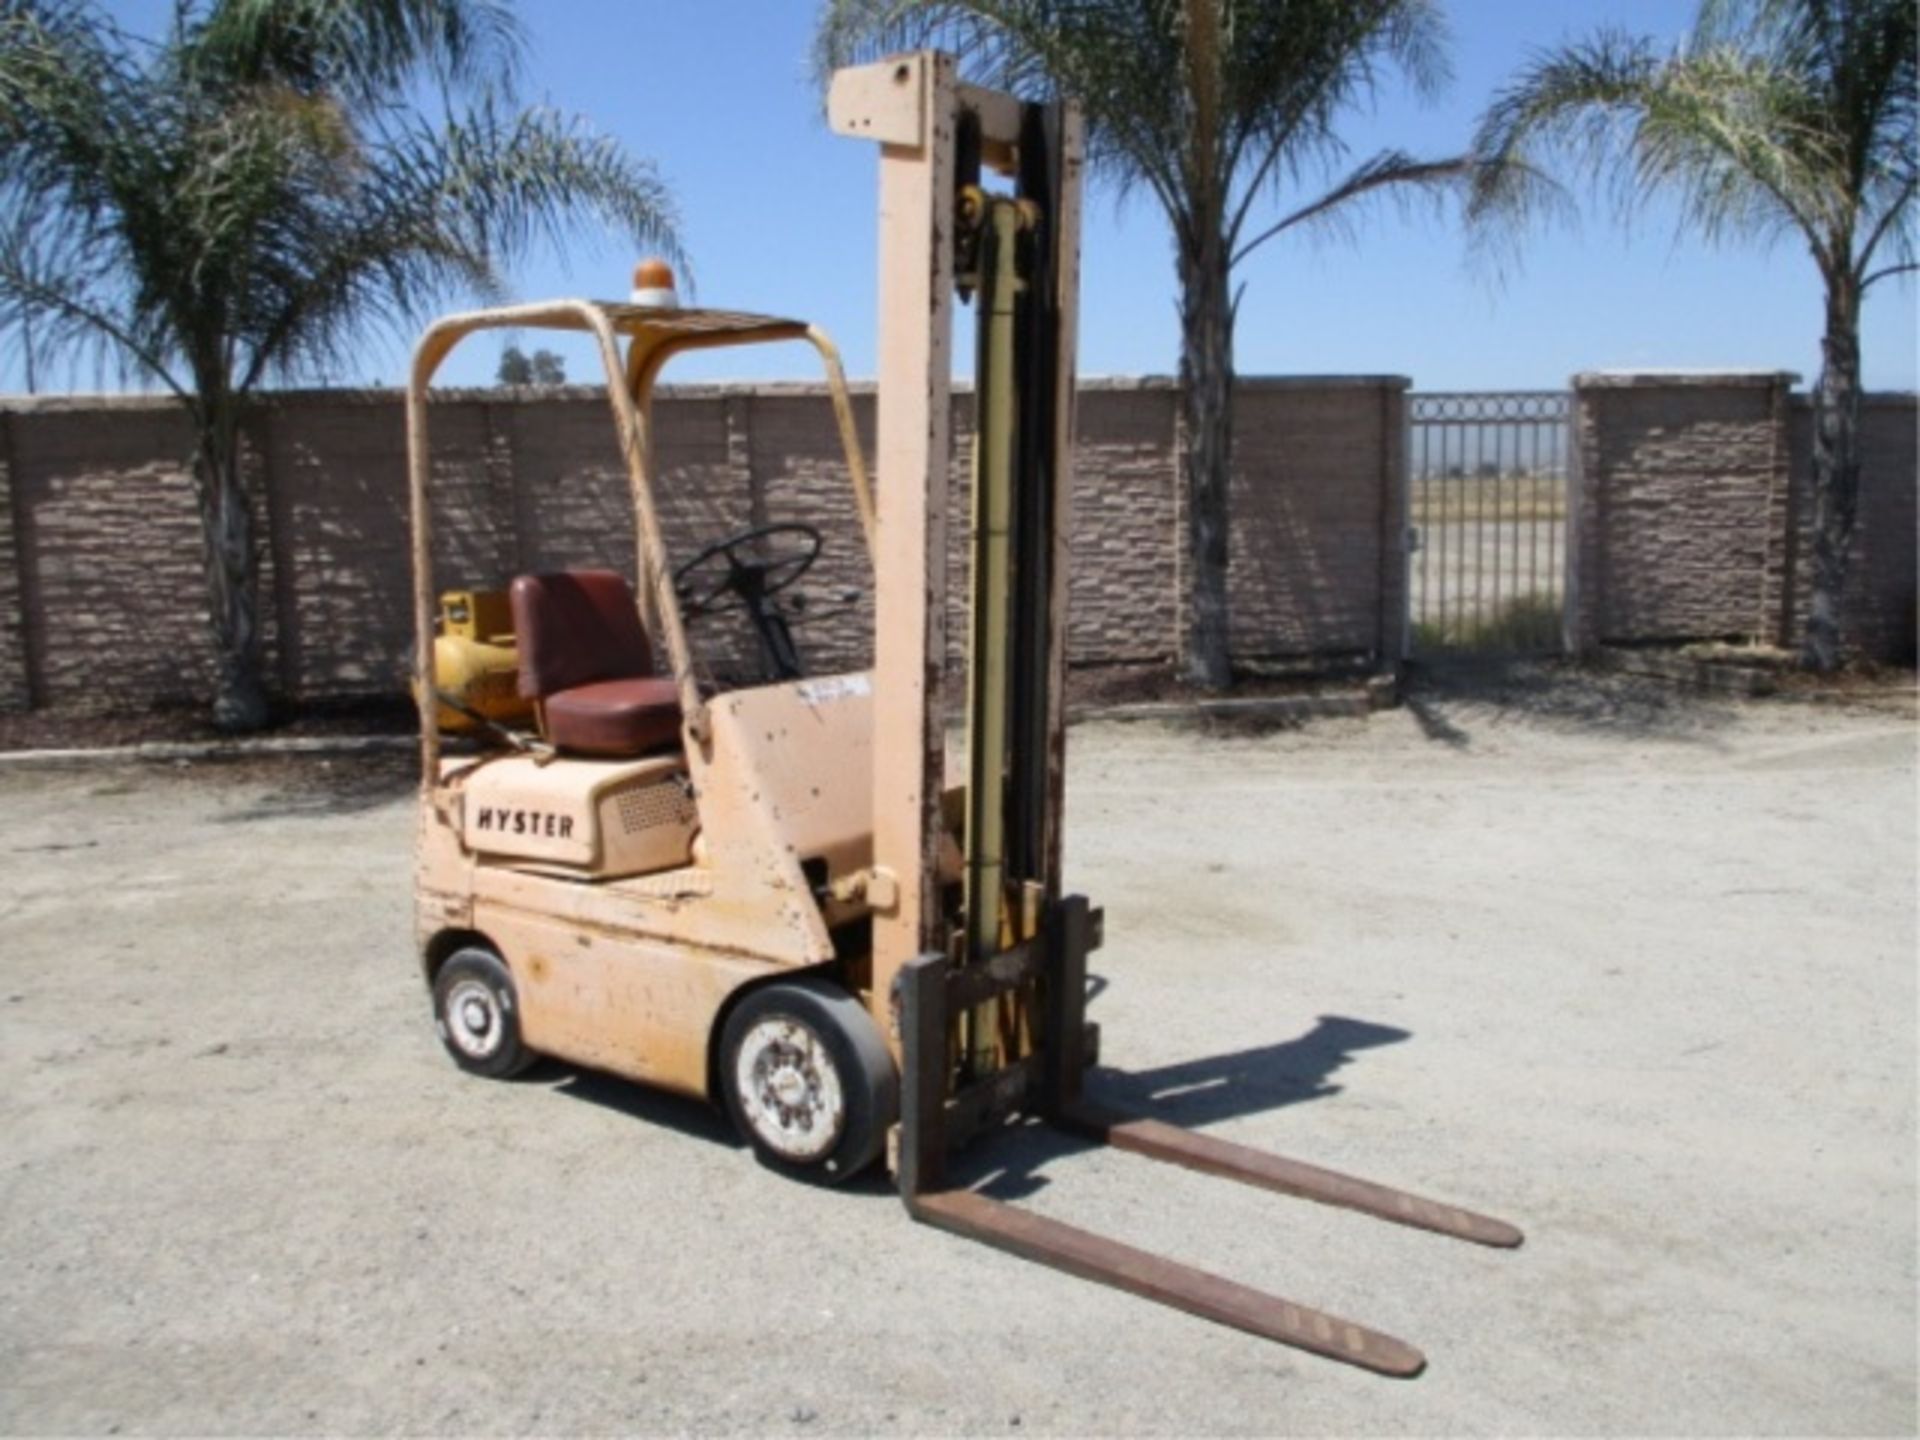 Hyster Warehouse Forklift, 4-Cyl LP Gas, Single Stage Mast, 4' Forks, Canopy, Solid Rubber Tires, - Image 6 of 27